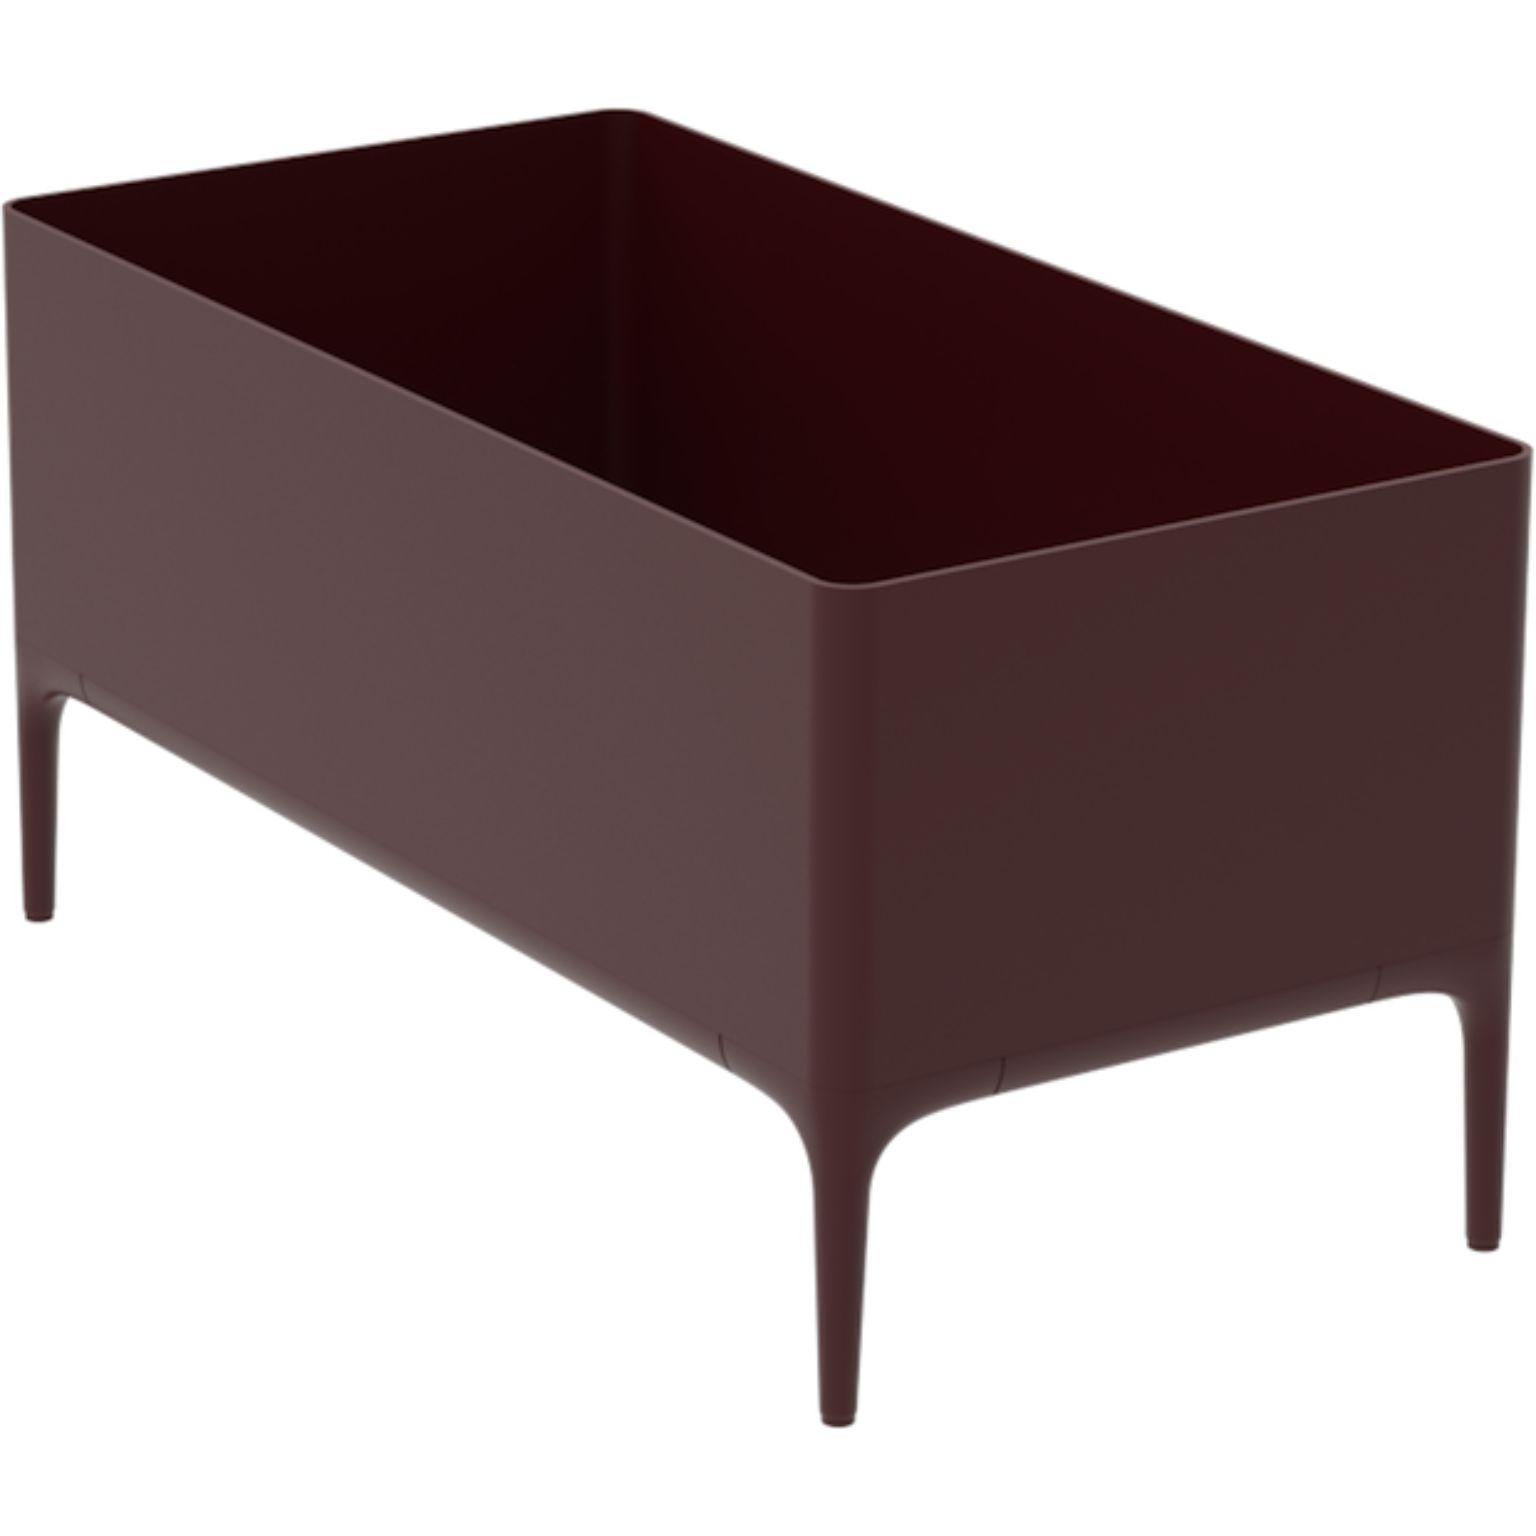 Xaloc Burgundy Planter by MOWEE
Dimensions: D90 x W45 x H45 cm
Material: Aluminium
Weight: 11 kg
Also Available in different colours and finishes. 

 Xaloc synthesizes the lines of interior furniture to extrapolate to the exterior, creating an